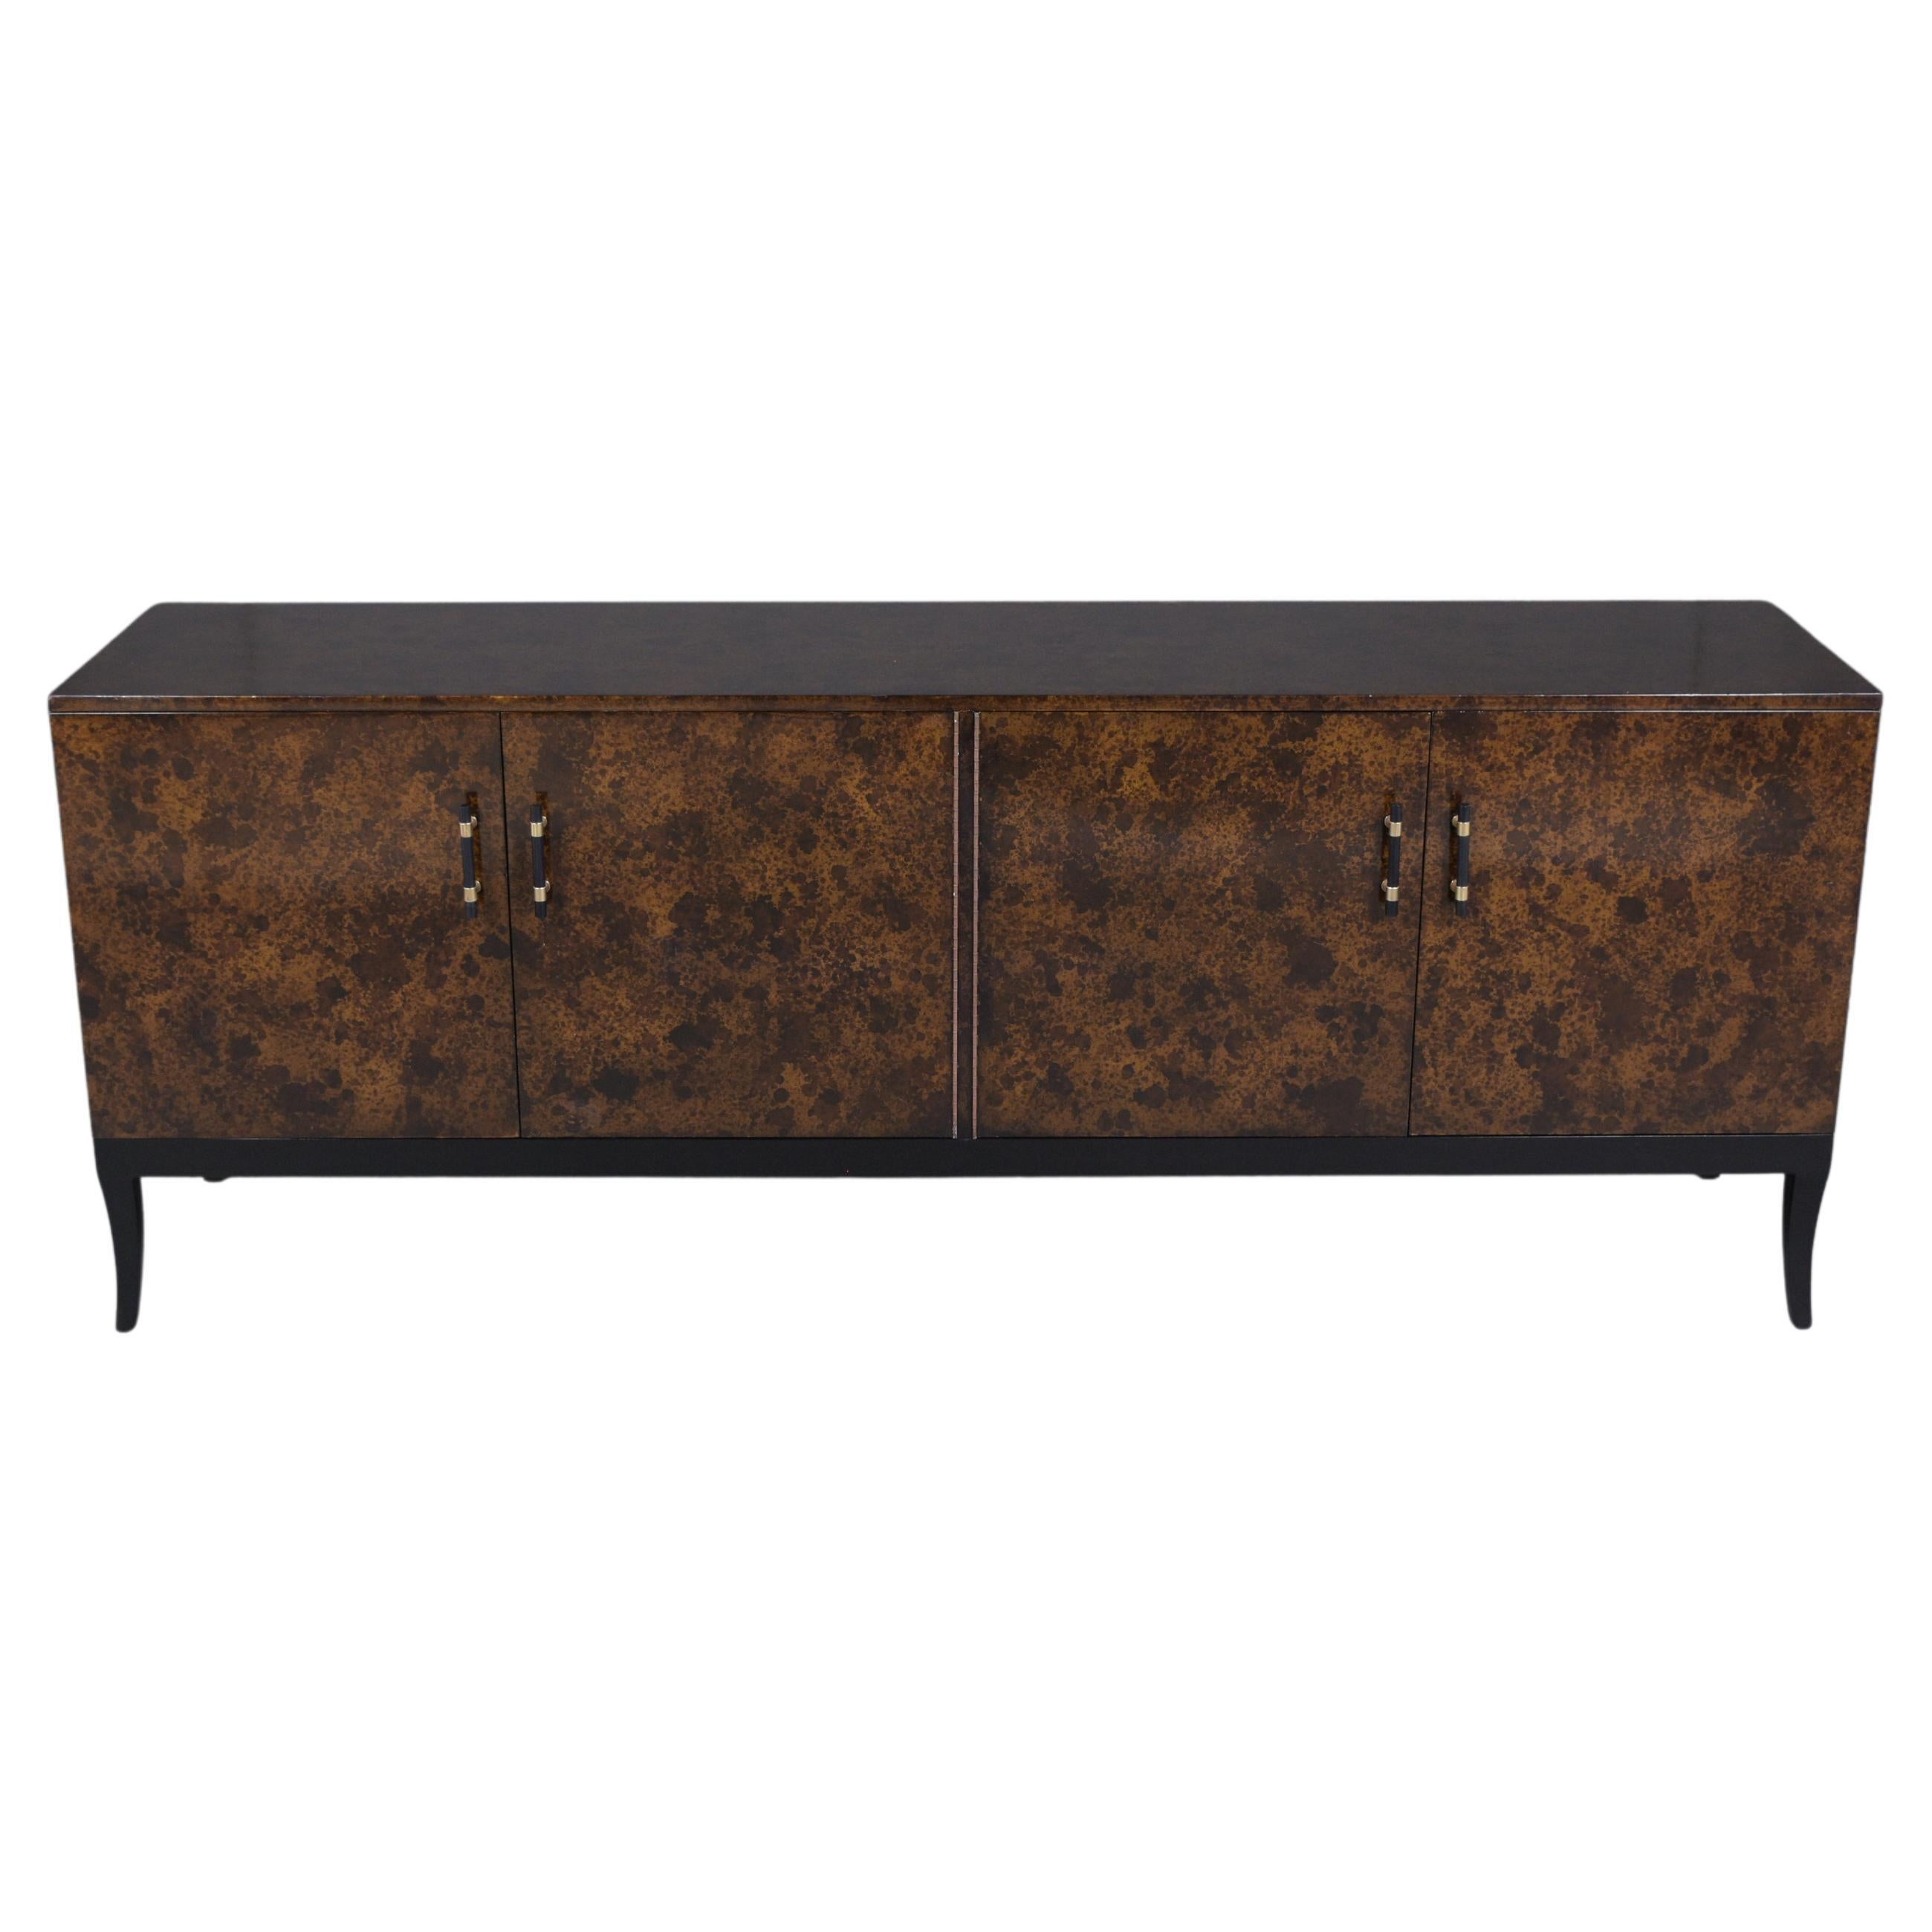 An extraordinary mid-century modern credenza beautifully crafted out of solid wood and has been newly restored by our craftsmen team. This vintage 1960s sideboard features a unique lacquered hand-made faux brown color turtle design finish, four